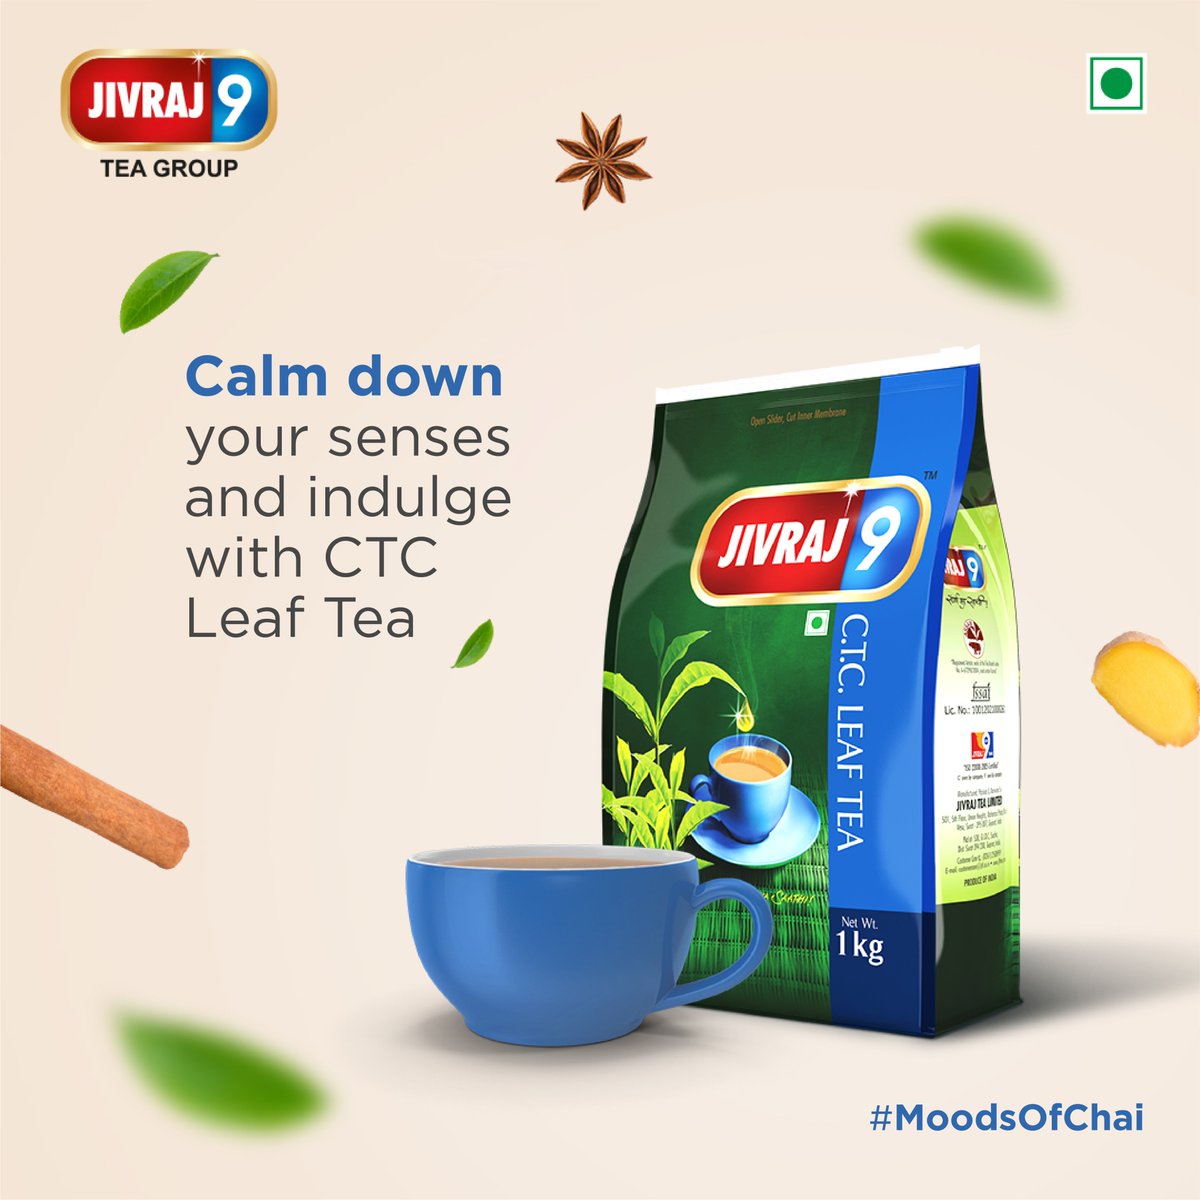 Begin your day on a calming note! Kick start with a strong cup of chai with Jivraj9 CTC Leaf Tea and win over the day ahead.
#MoodsOfChai
.
#Jivraj9 #Sangharsh #SangharshKaSaathi #Jivraj9Tea #Tea #Soothing #Workaholics #RefreshingDrink #Beverages